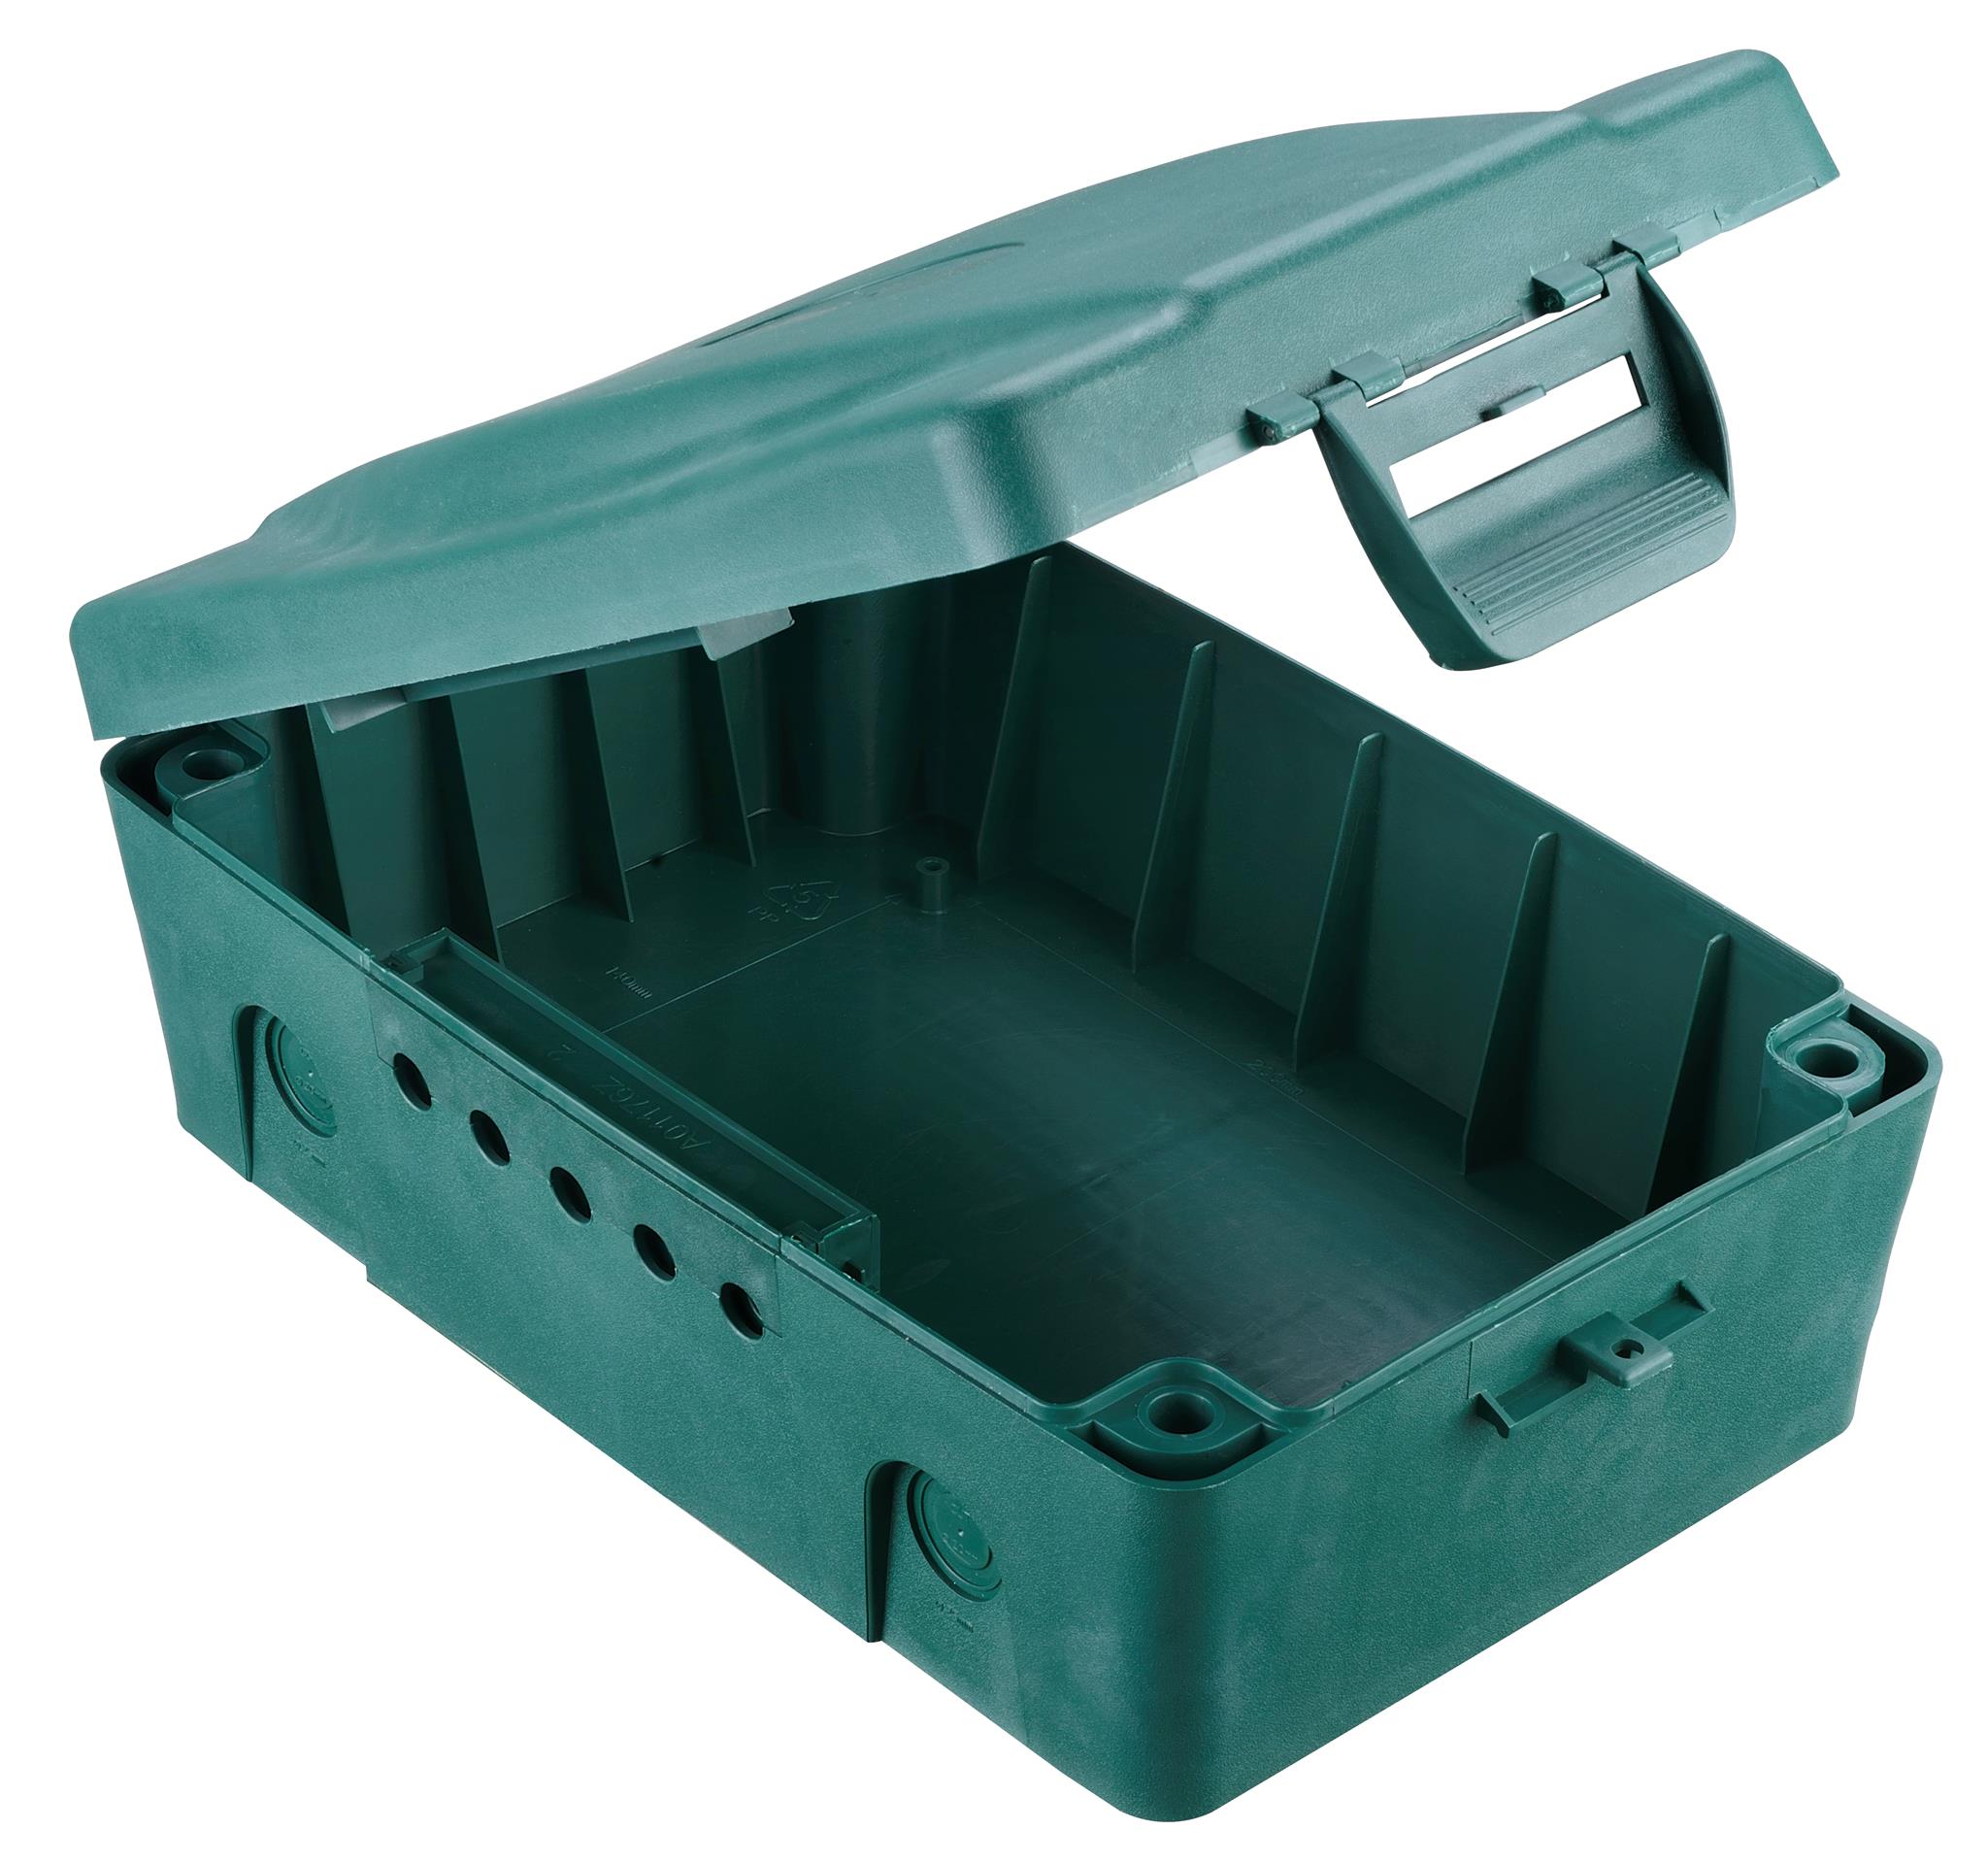 Masterplug 15-in x 9-in Plastic Green Cable Management Box in the